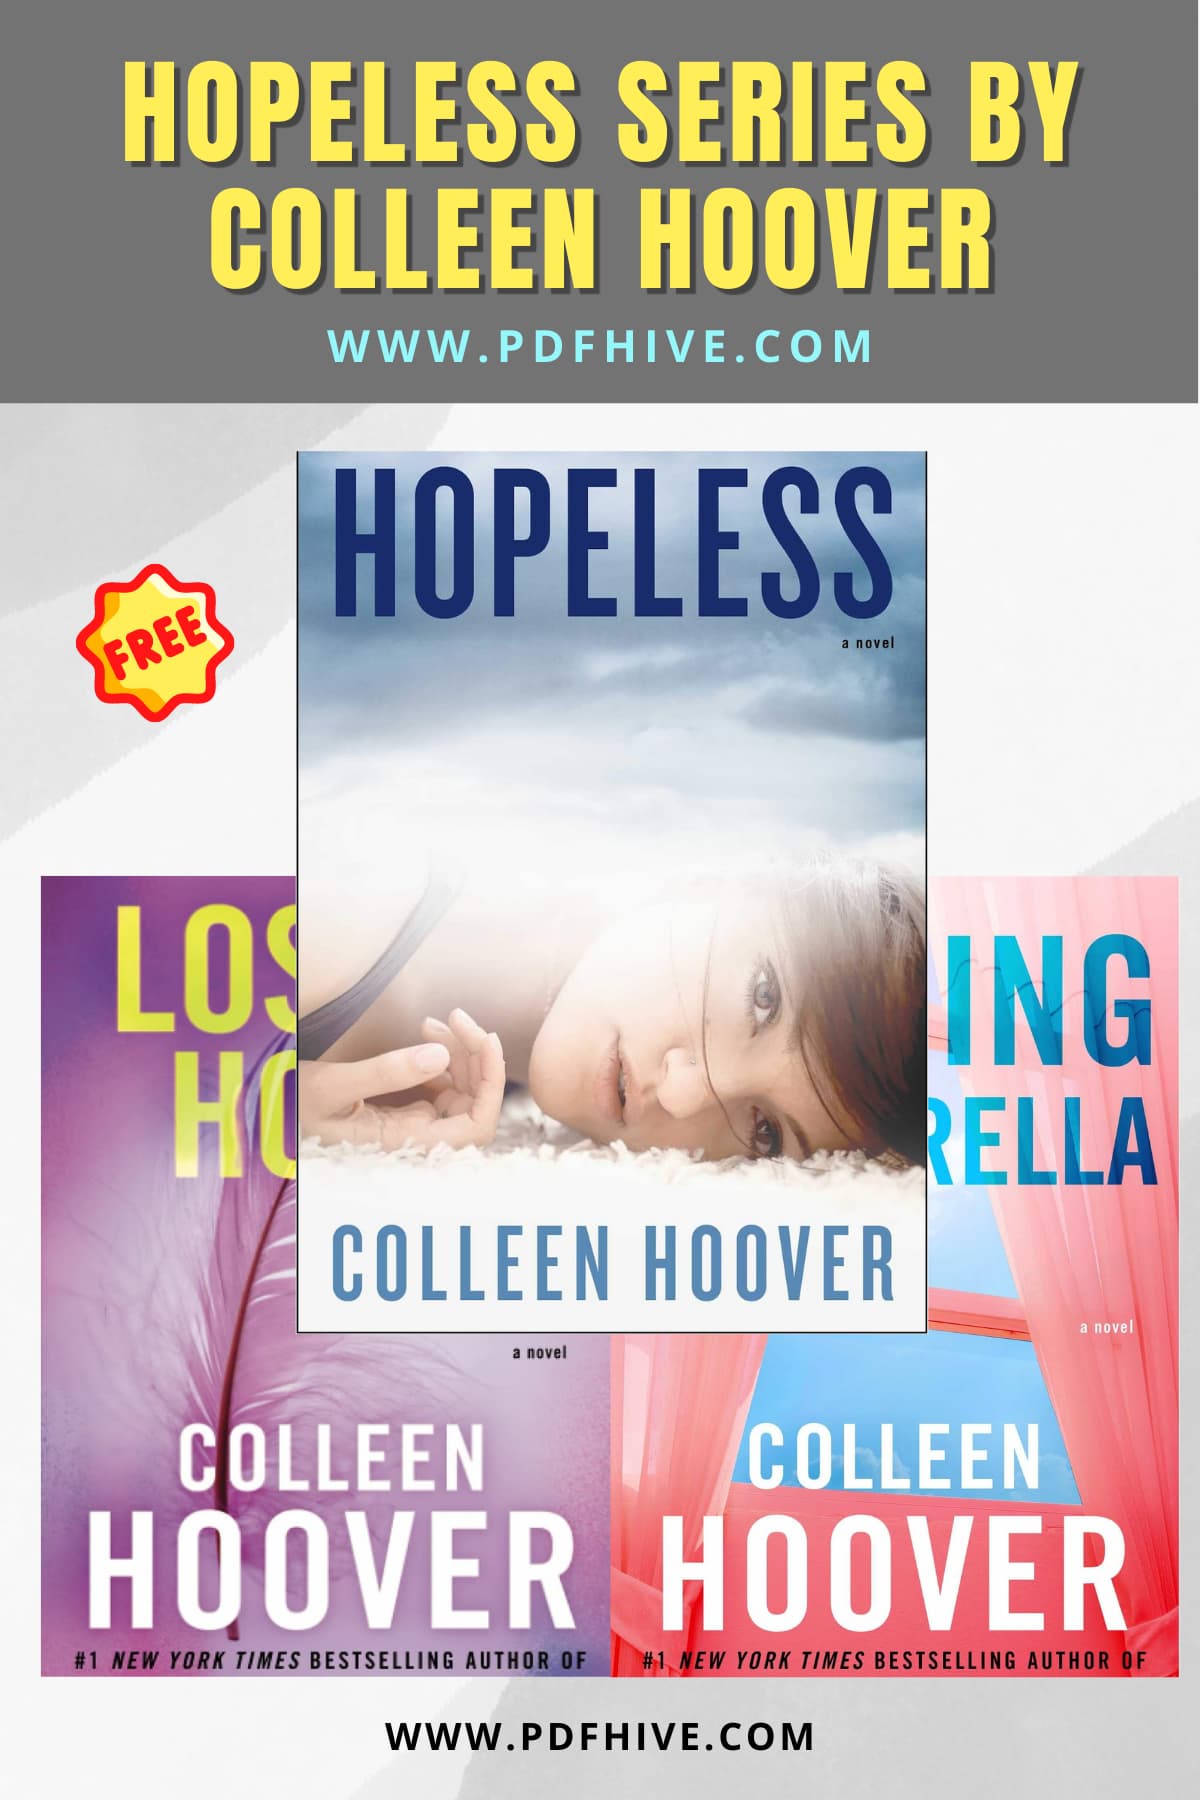 Bestsellers, Book Series, Books Series In Order, Colleen Hoover Books In Order, Contemporary Romance, Fiction, Hopeless Books In Order, Hopeless series, New Adult Romance, Romance